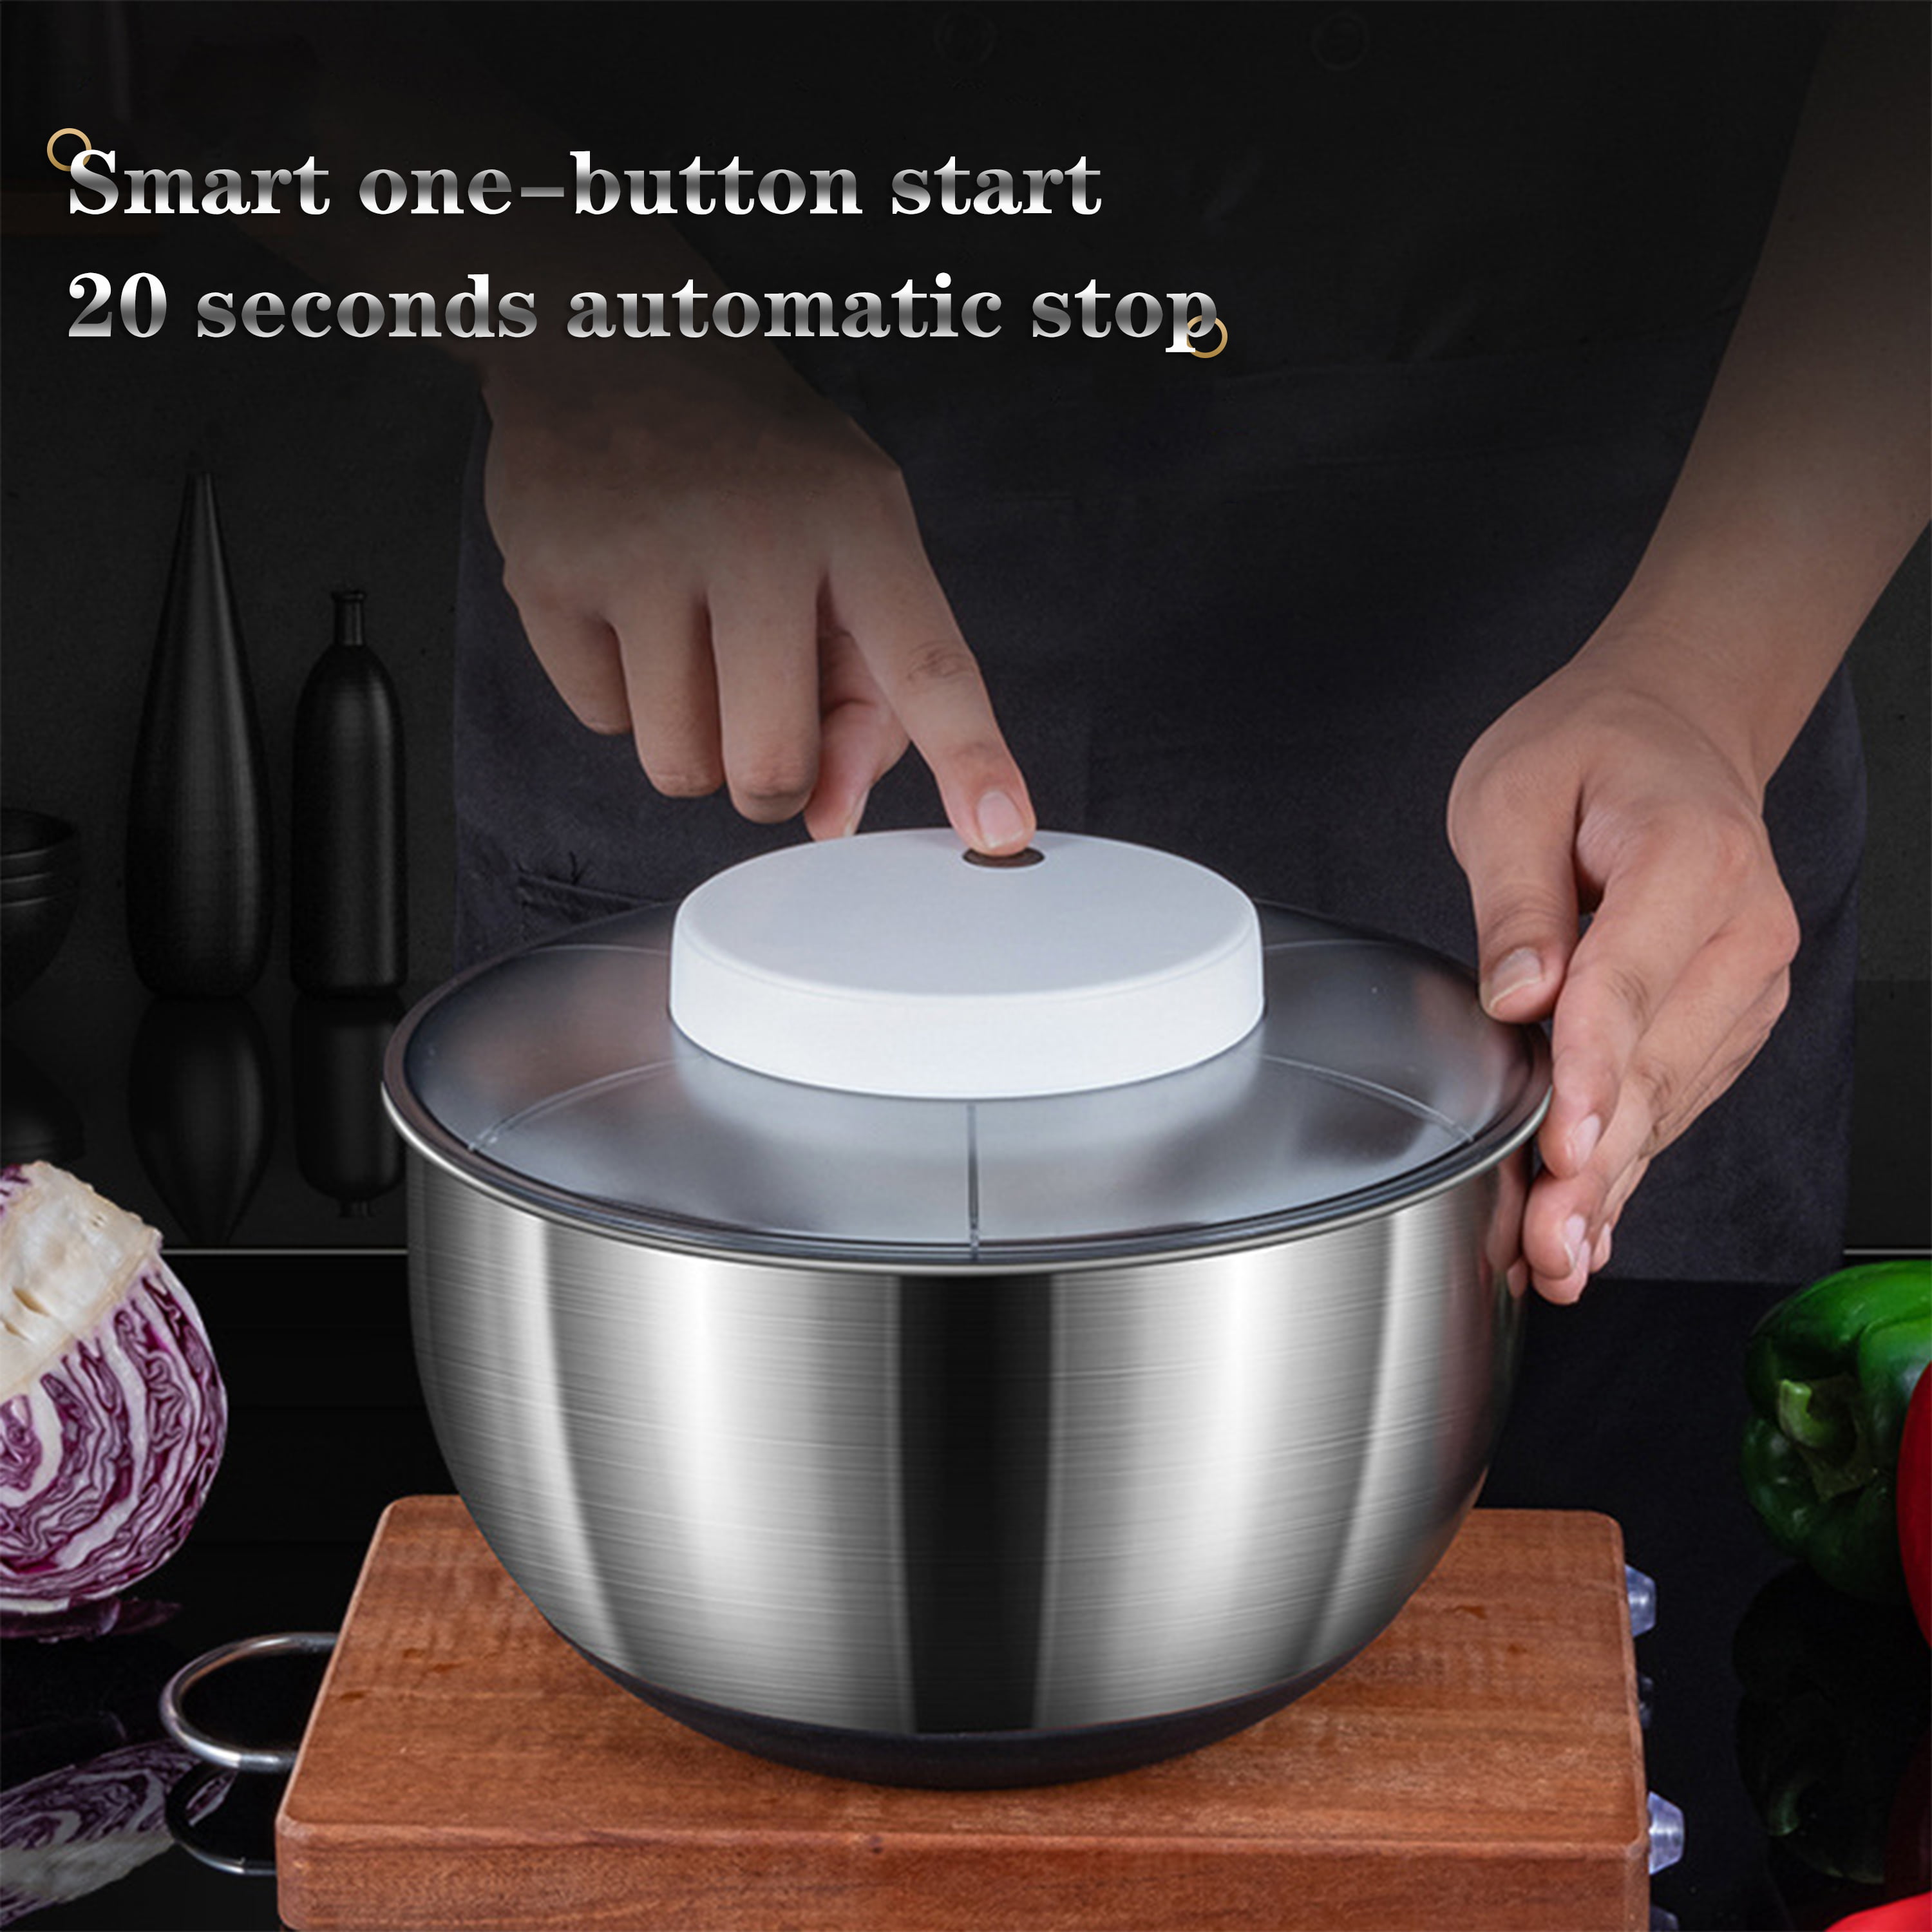 HSTYAIG Automatic Electric Salad Spinner, 5L USB Rechargeable Lettuce Spinner Stainless Steel Salad Rotator Lettuce Washer and Spinner Dryer for